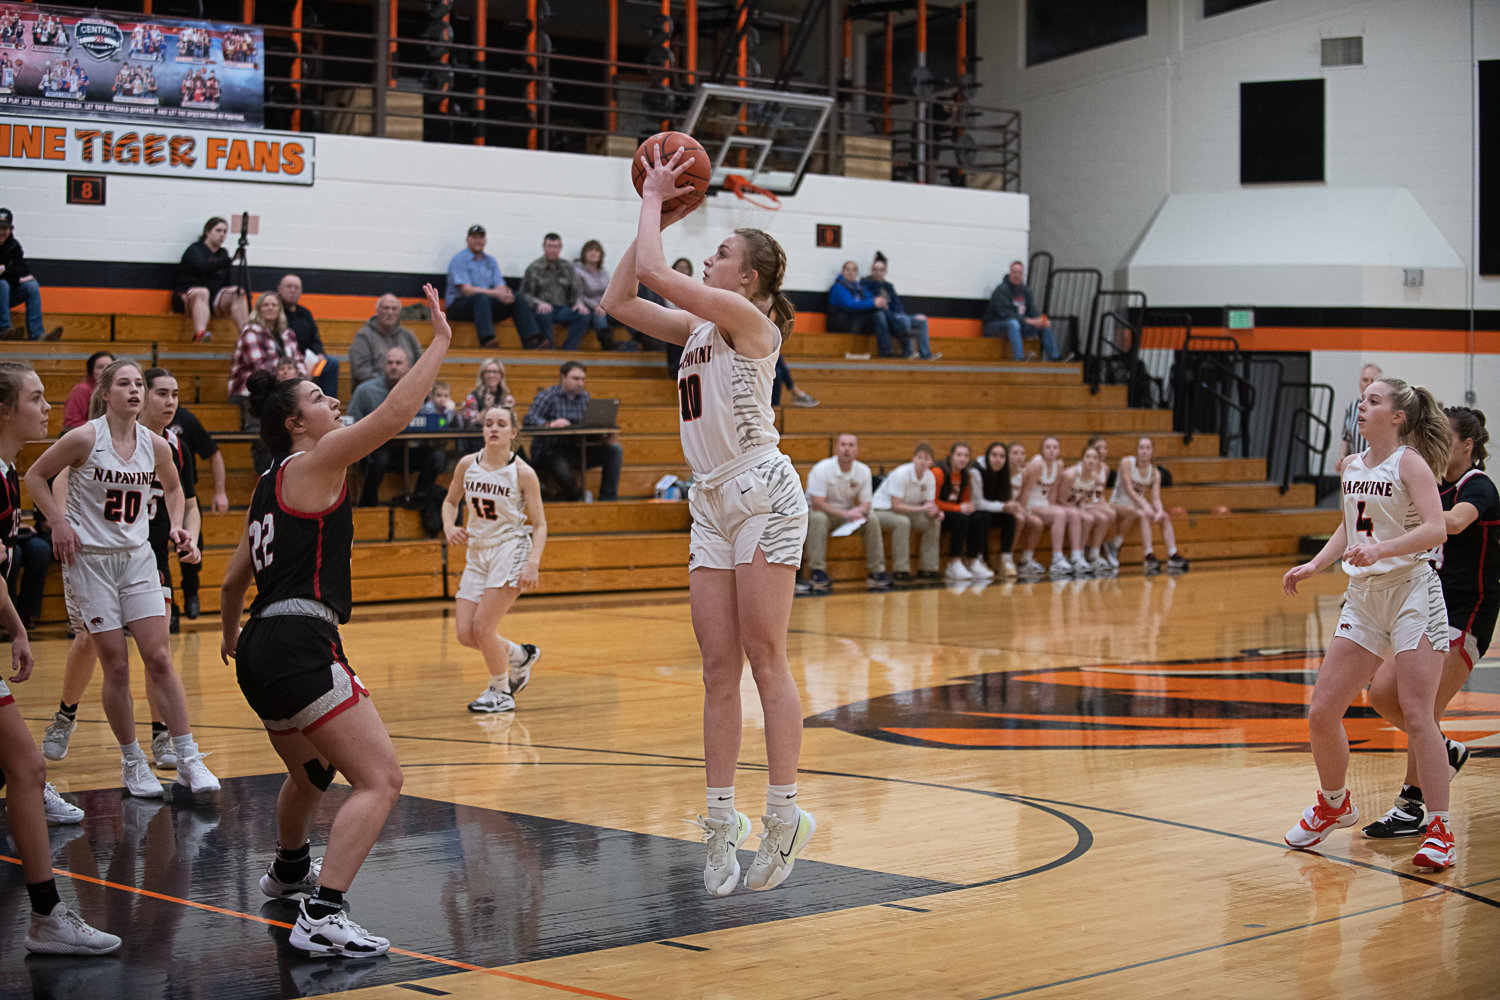 Keira O'Neill shoots a jumper from just inside the elbow during the first quarter of Napavine's win over Toledo on Dec. 14.